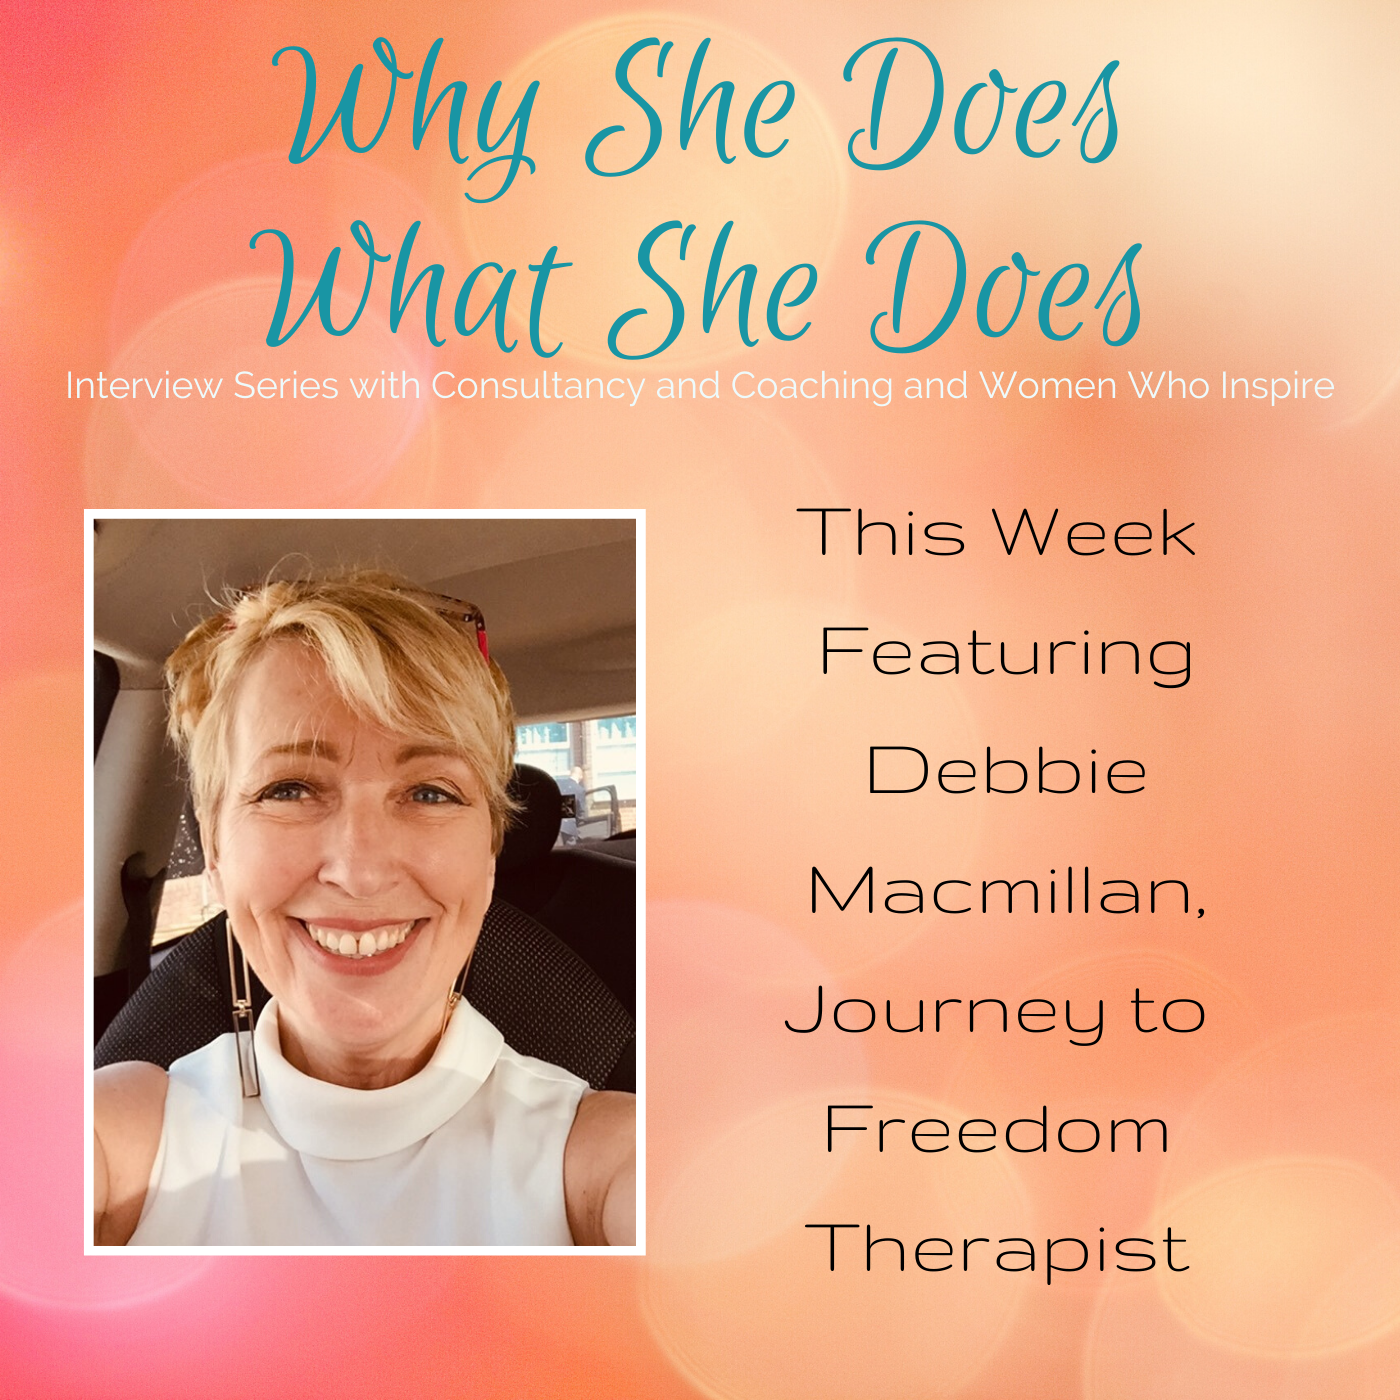 Debbie Macmillan, Why She Does What She Does, Interview with Carol Evans, Consultancy and Coaching